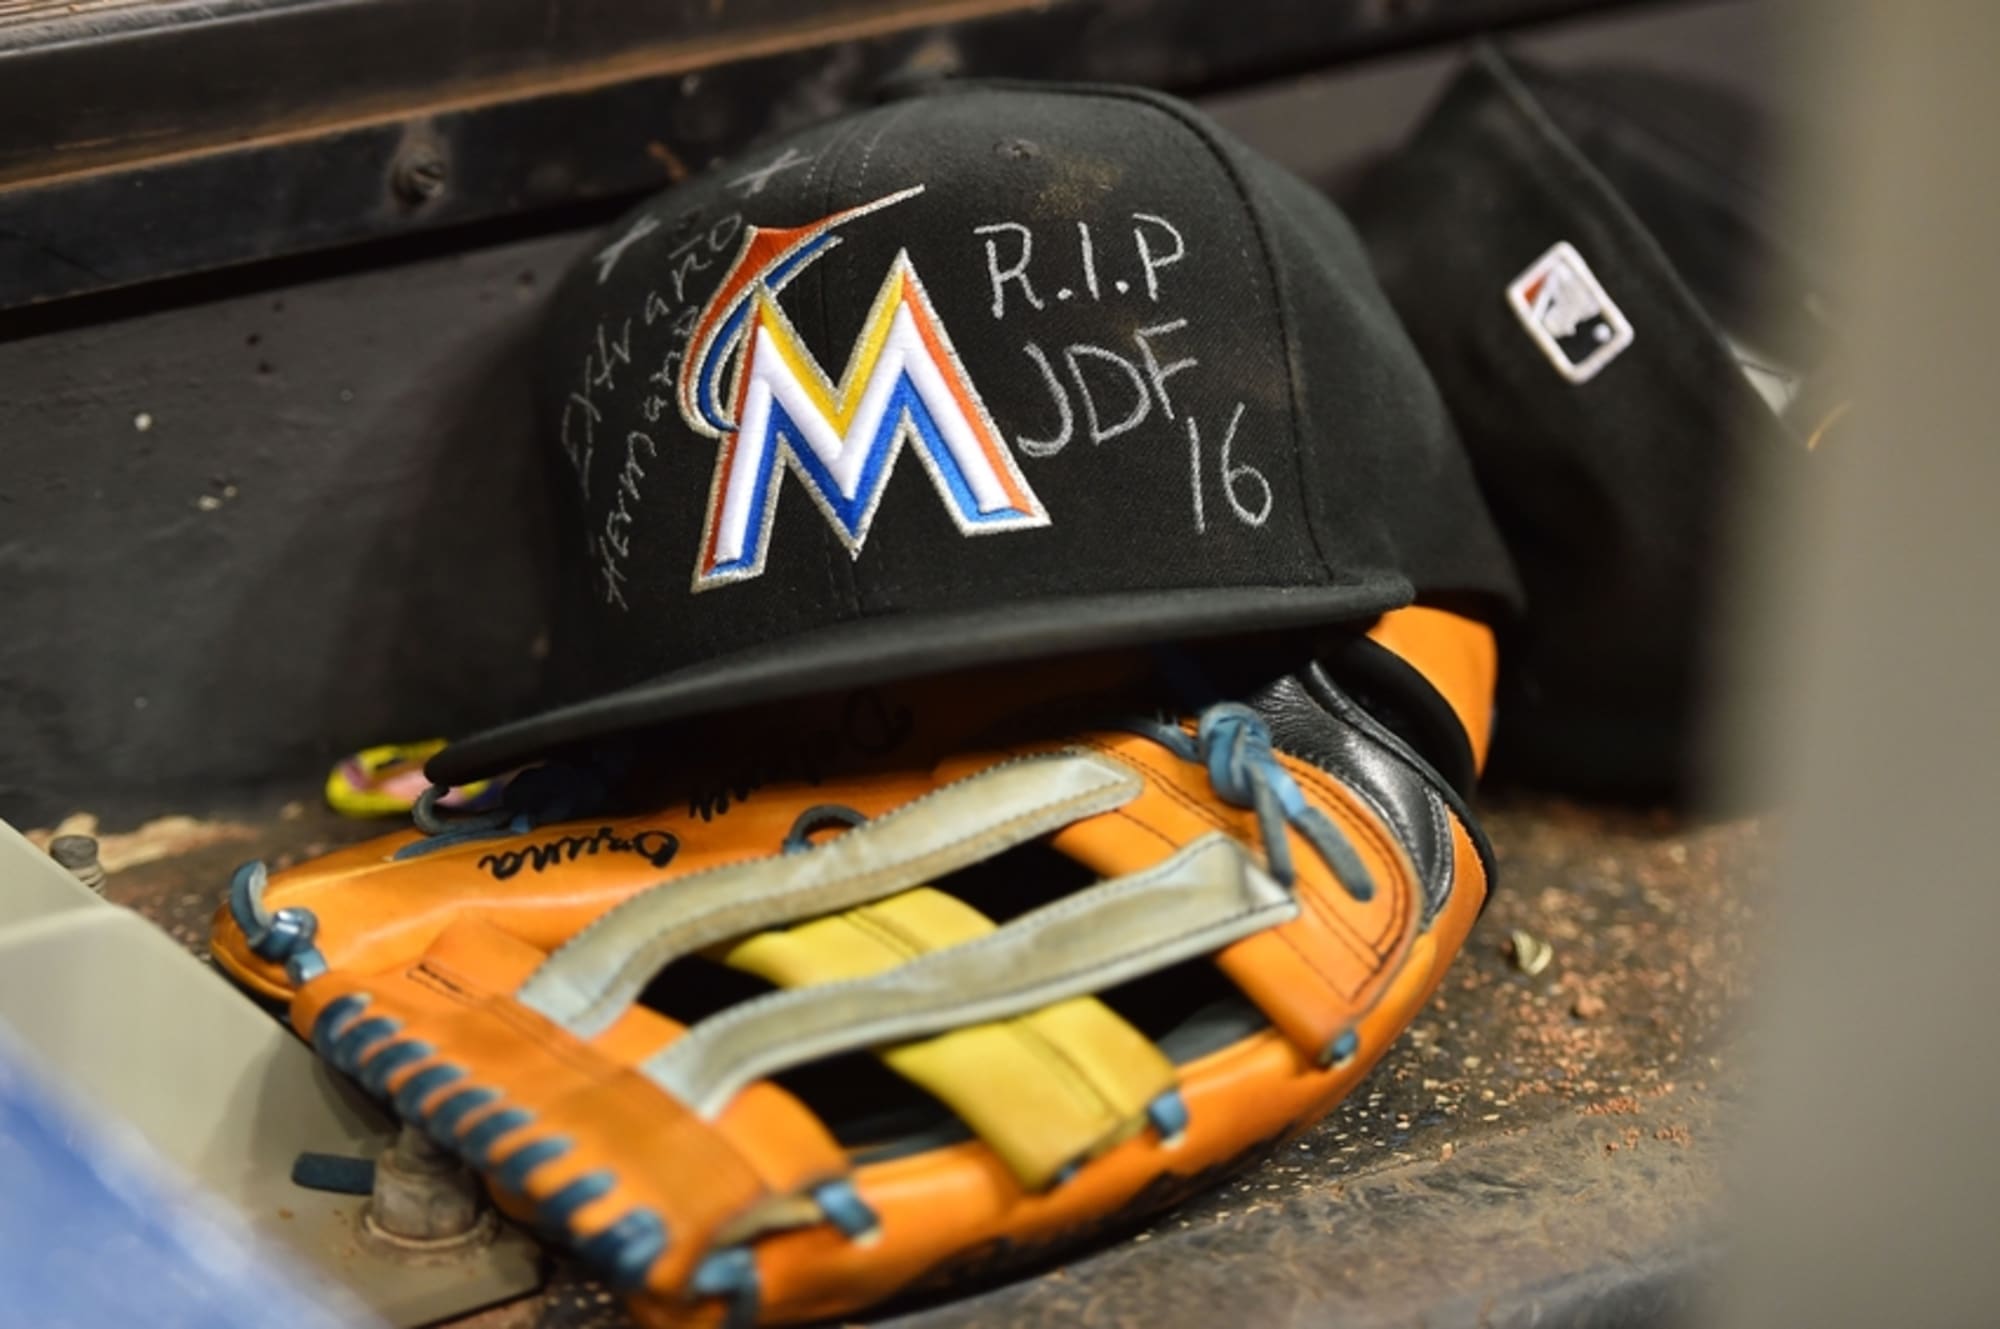 Jose Fernandez Killed in Boating Accident: Pain and Disbelief